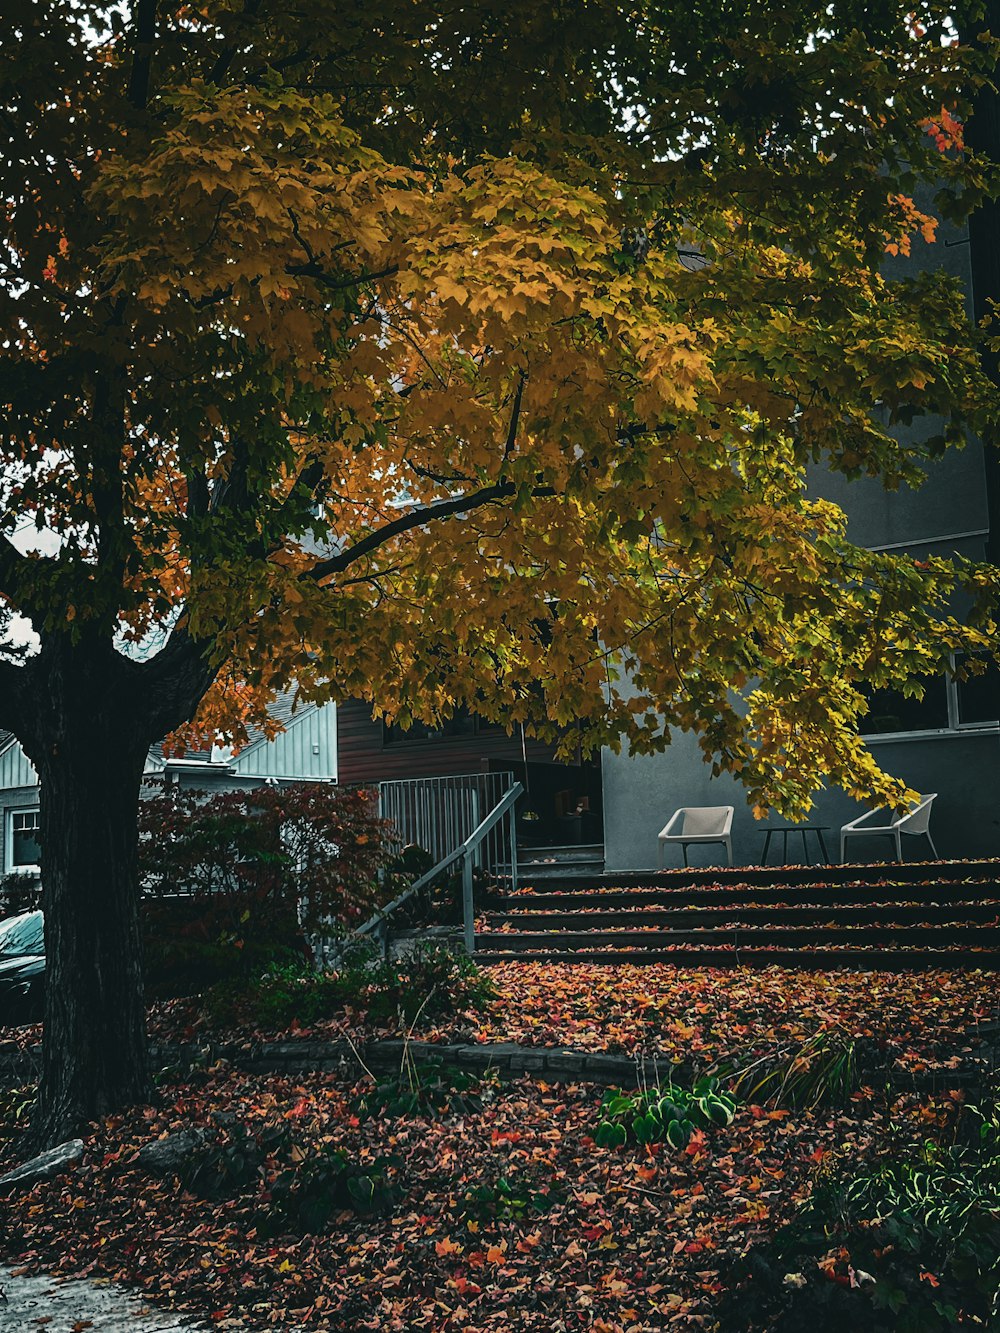 a tree with yellow leaves in front of a building